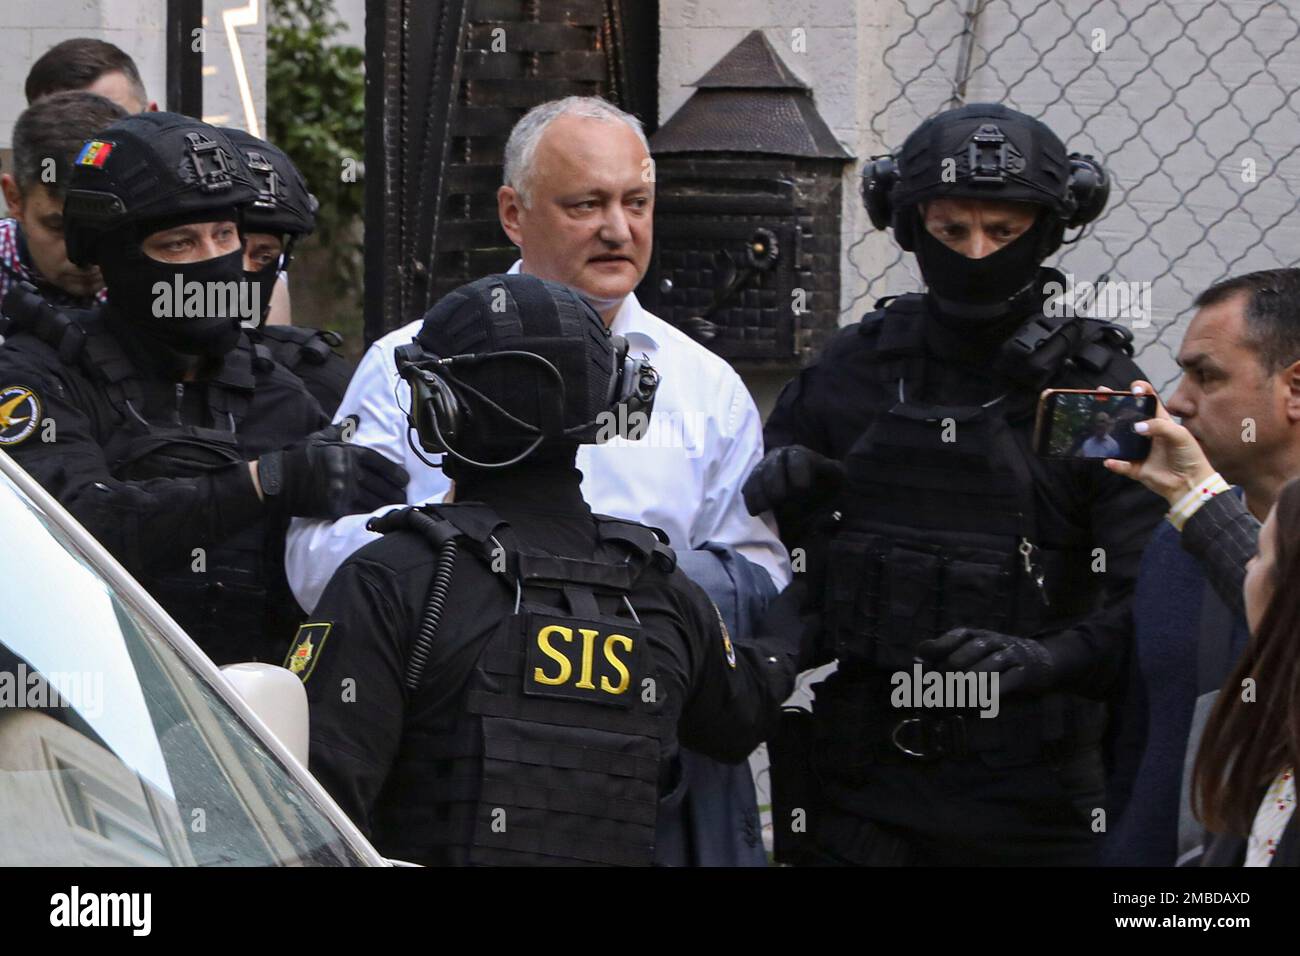 Members of Moldova's Information and Security service (SIS) escort former  Moldovan President Igor Dodon to a van after he was detained at his house  in Chisinau, Moldova, Tuesday, May 24, 2022. Moldovan